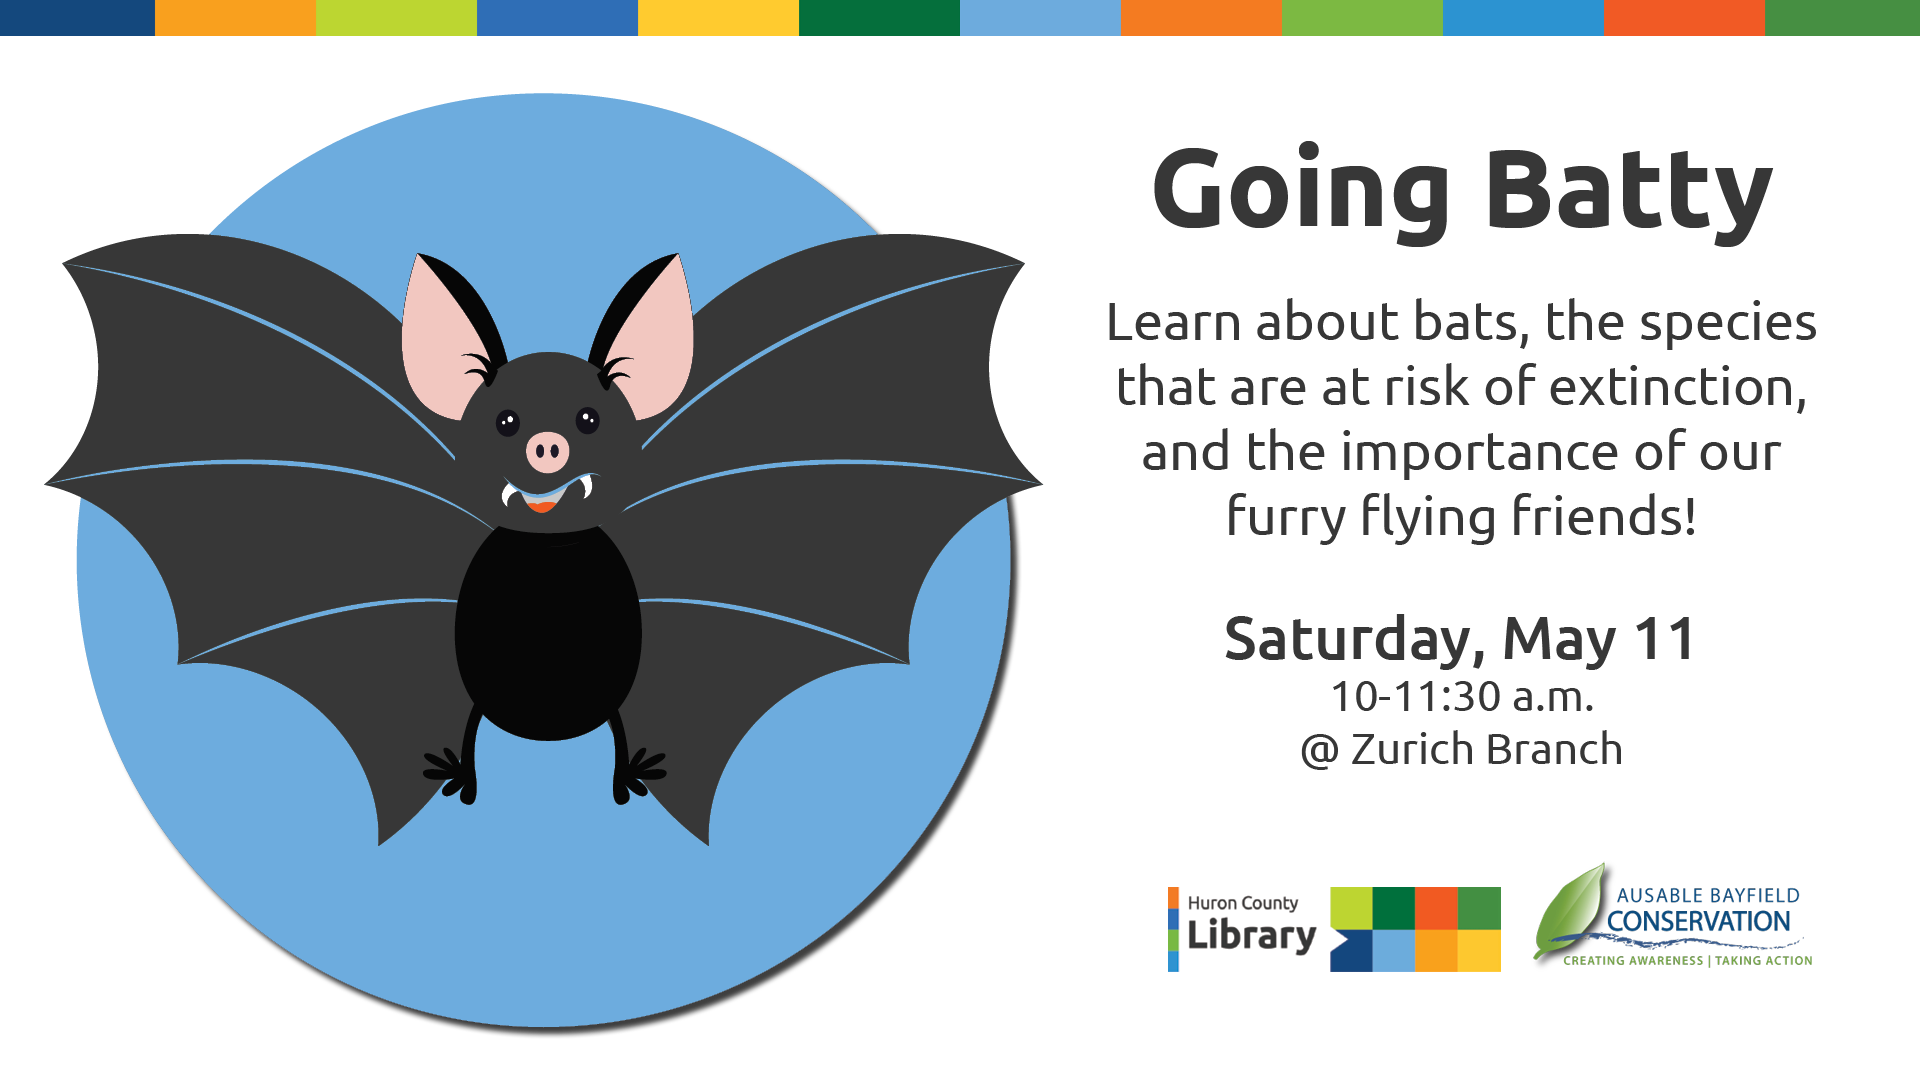 Illustration of a bat with text promoting Going Batty at Zurich Branch